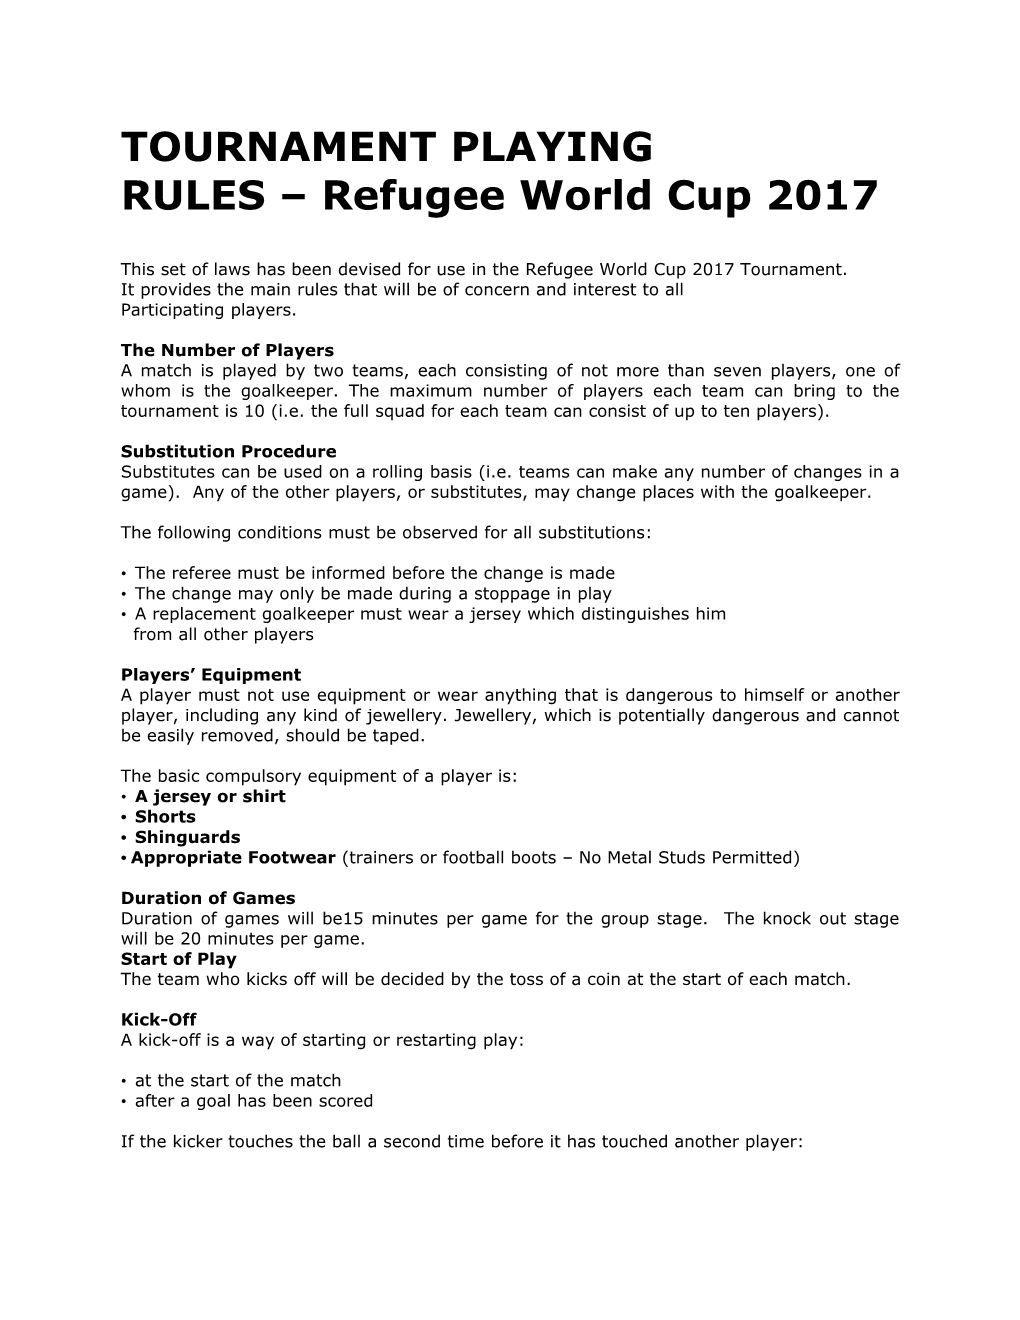 RULES Refugee World Cup 2017